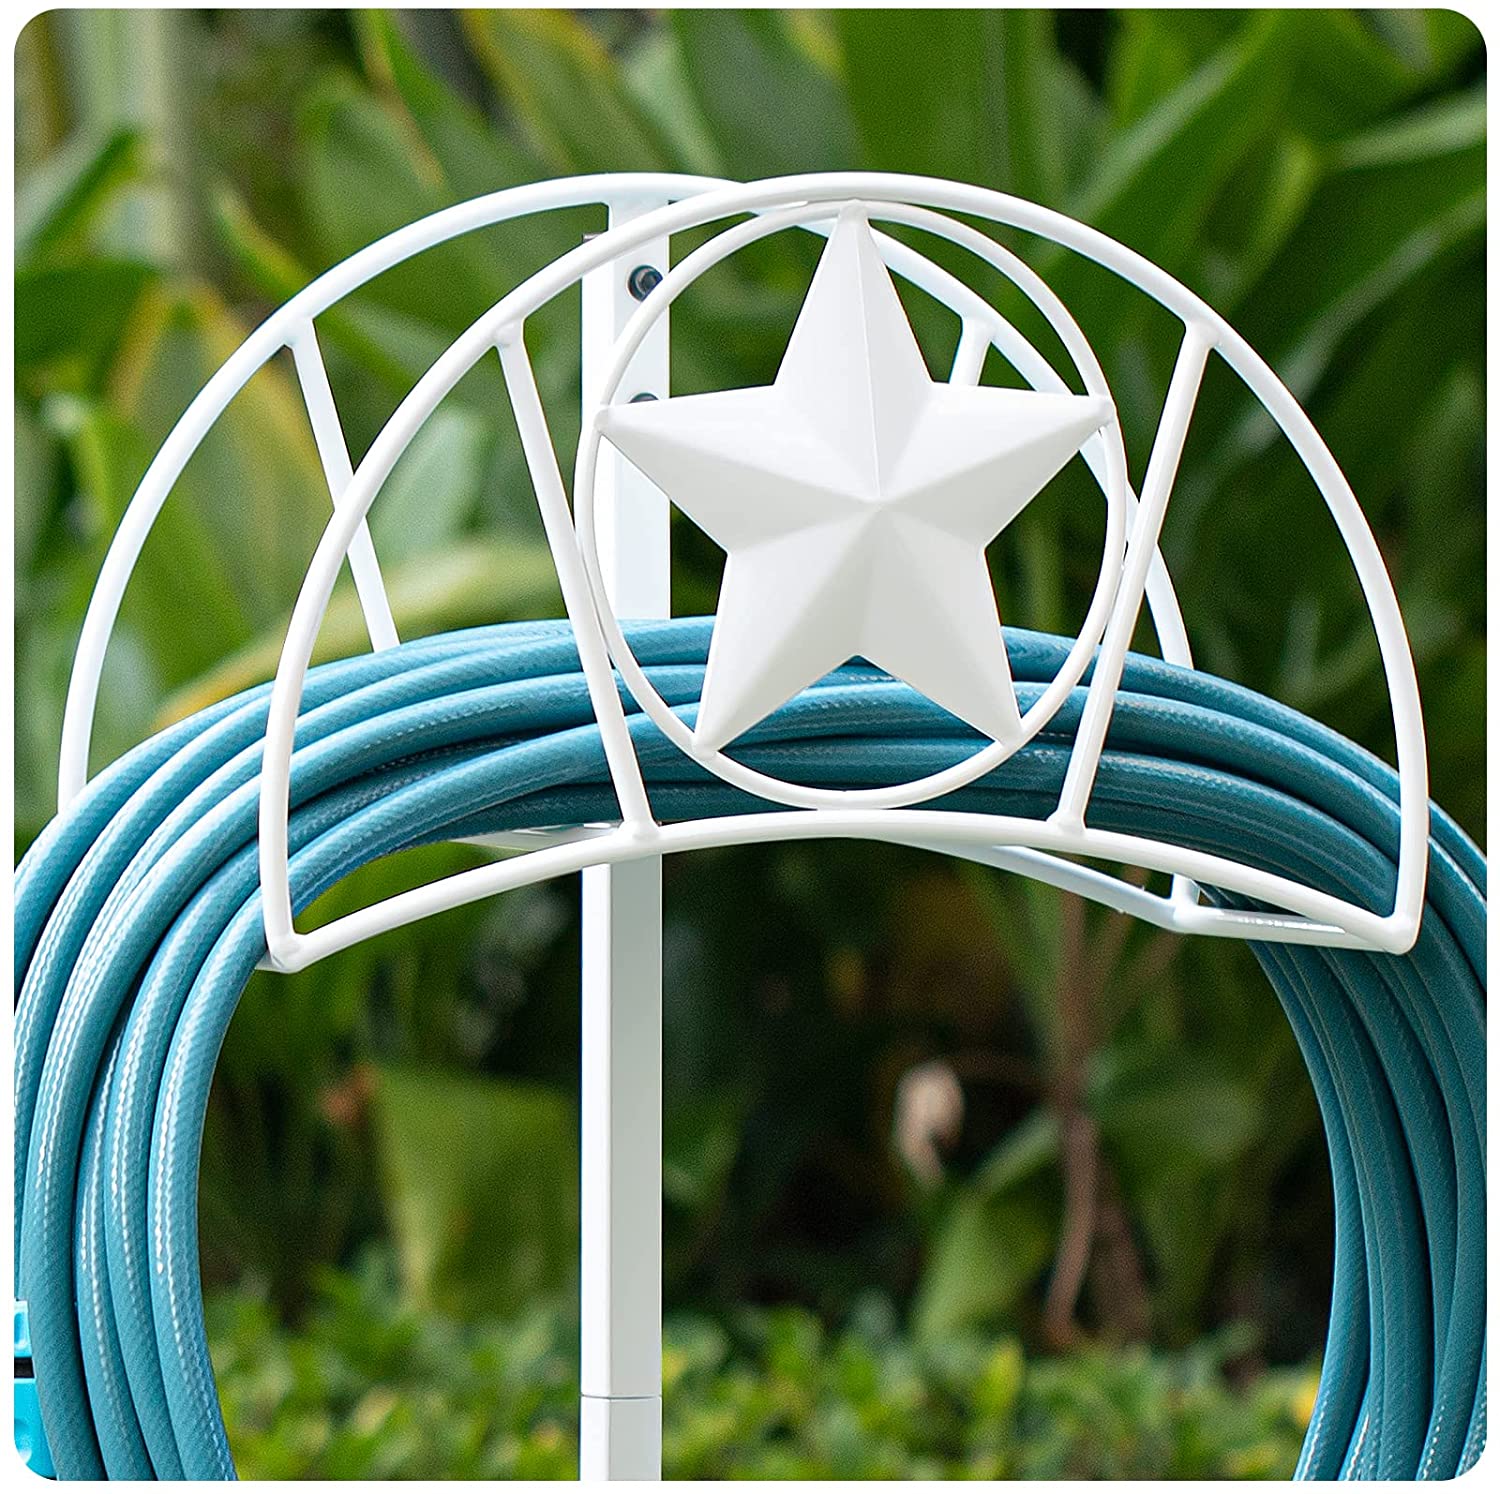 Amagabeli Garden Hose Holder Hanger Stand Freestanding Holds 125ft Water Hose Detachable Rustproof Organizer Storage Metal Heavy Duty Decorative Star with Ground Stakes for Outside Lawn Yard White - image 5 of 8